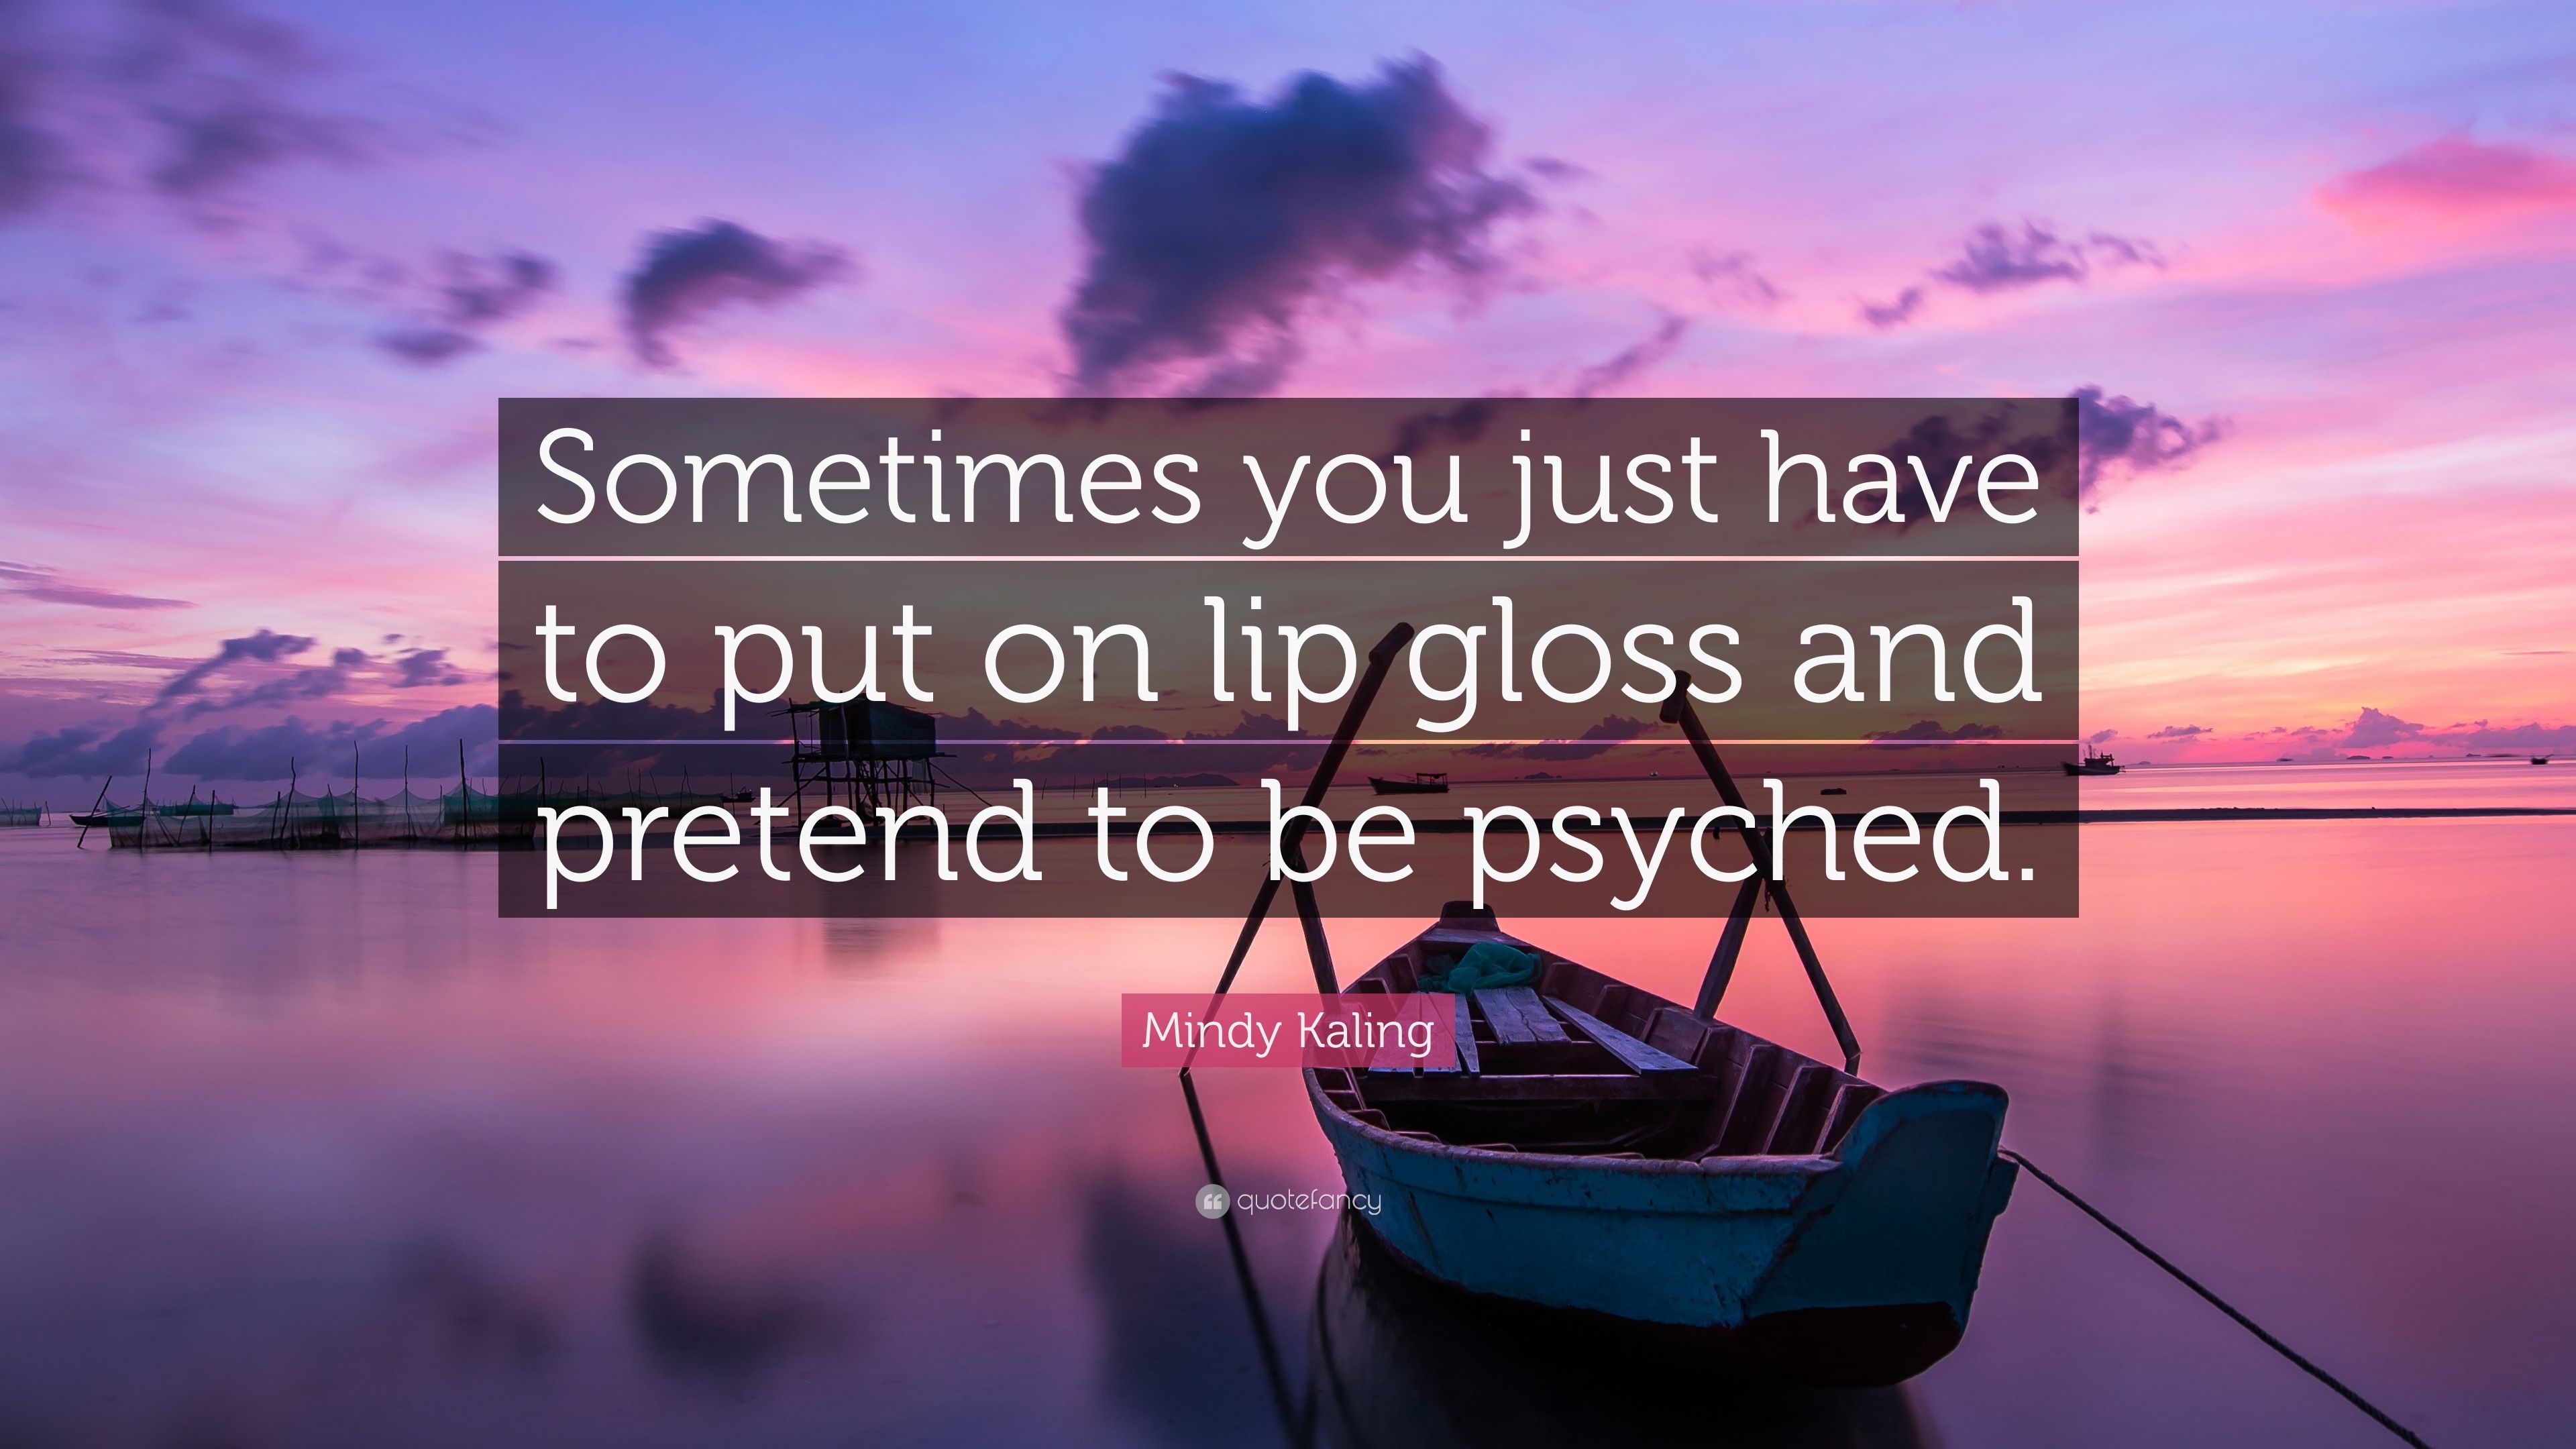 Mindy Kaling Quote: “Sometimes you just have to put on lip gloss